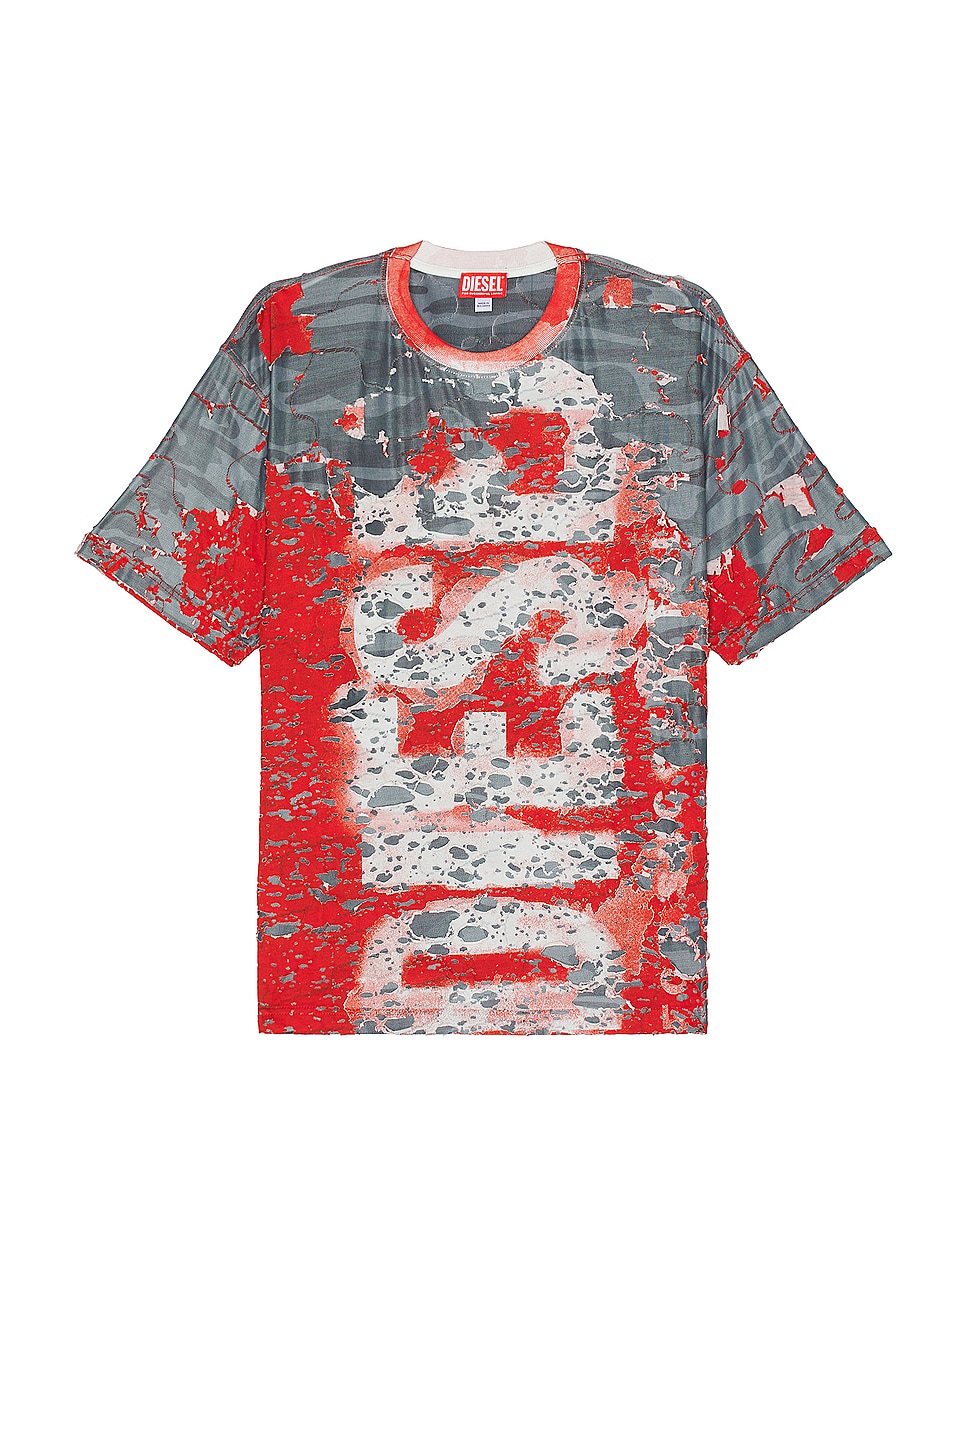 Image 1 of Diesel Boxt Peel T-shirt in Formula Red